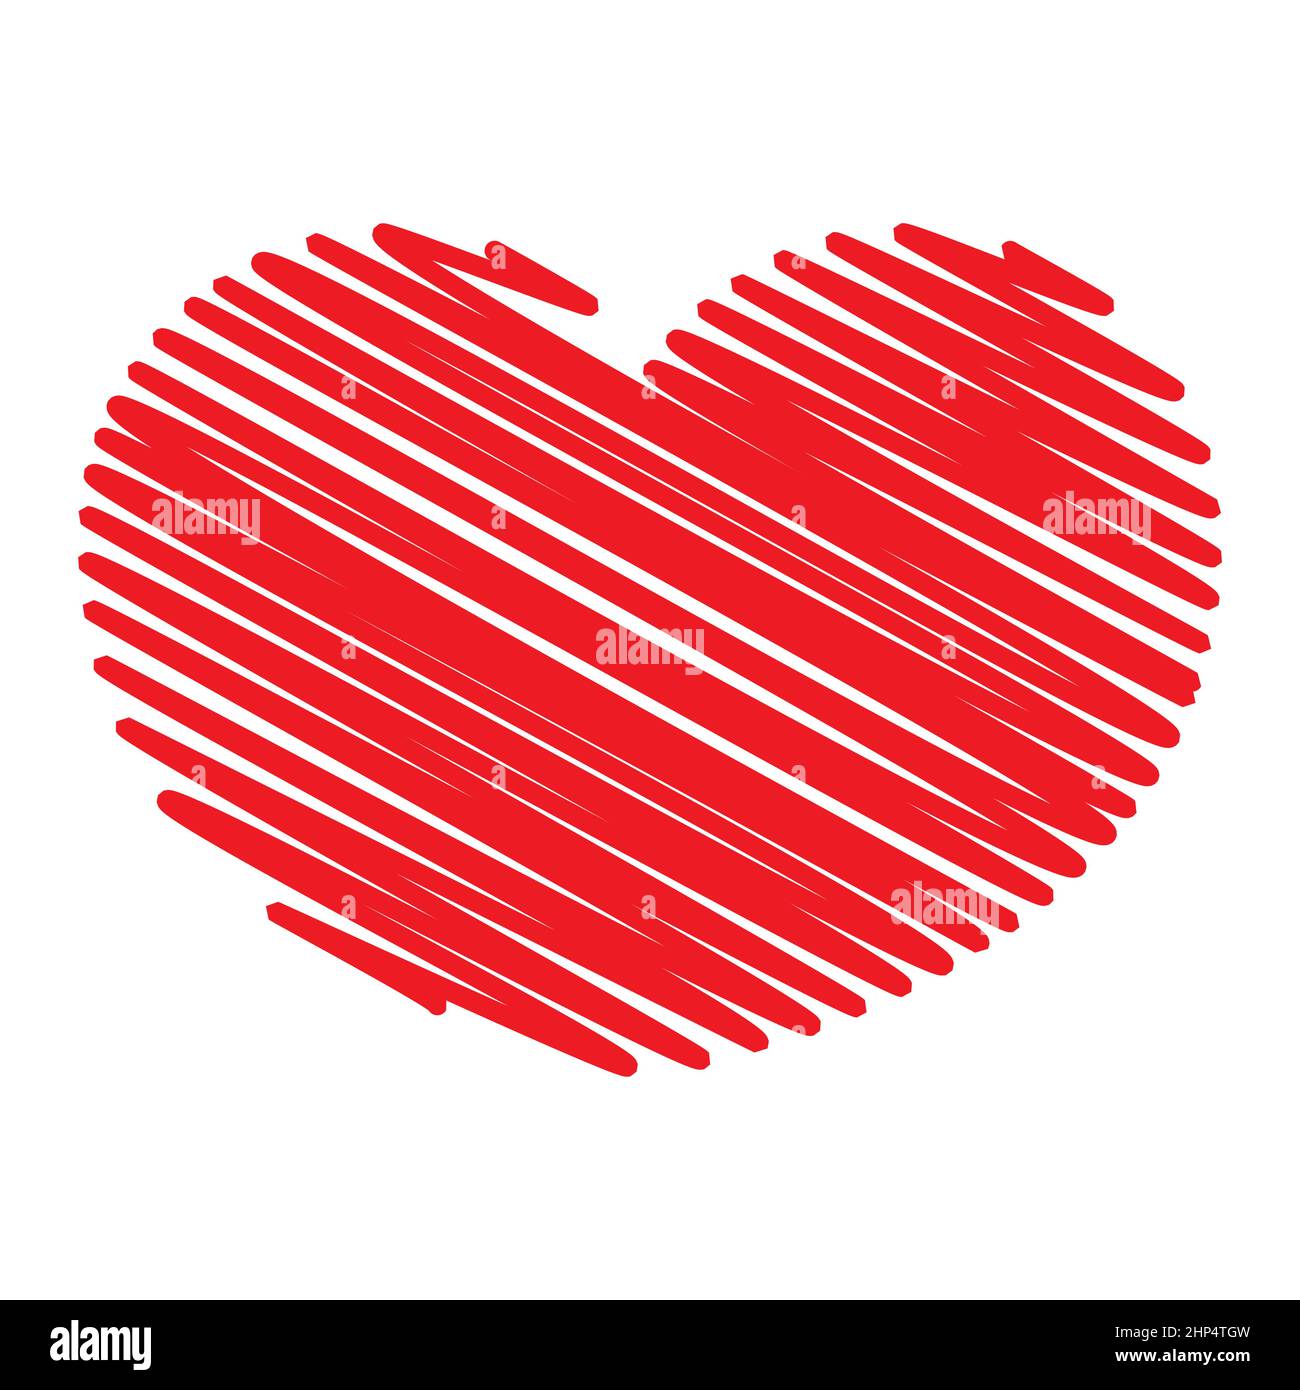 Heart symbol. Scribble, doodle red love shape. Vector illustration isolated on white. Stock Vector